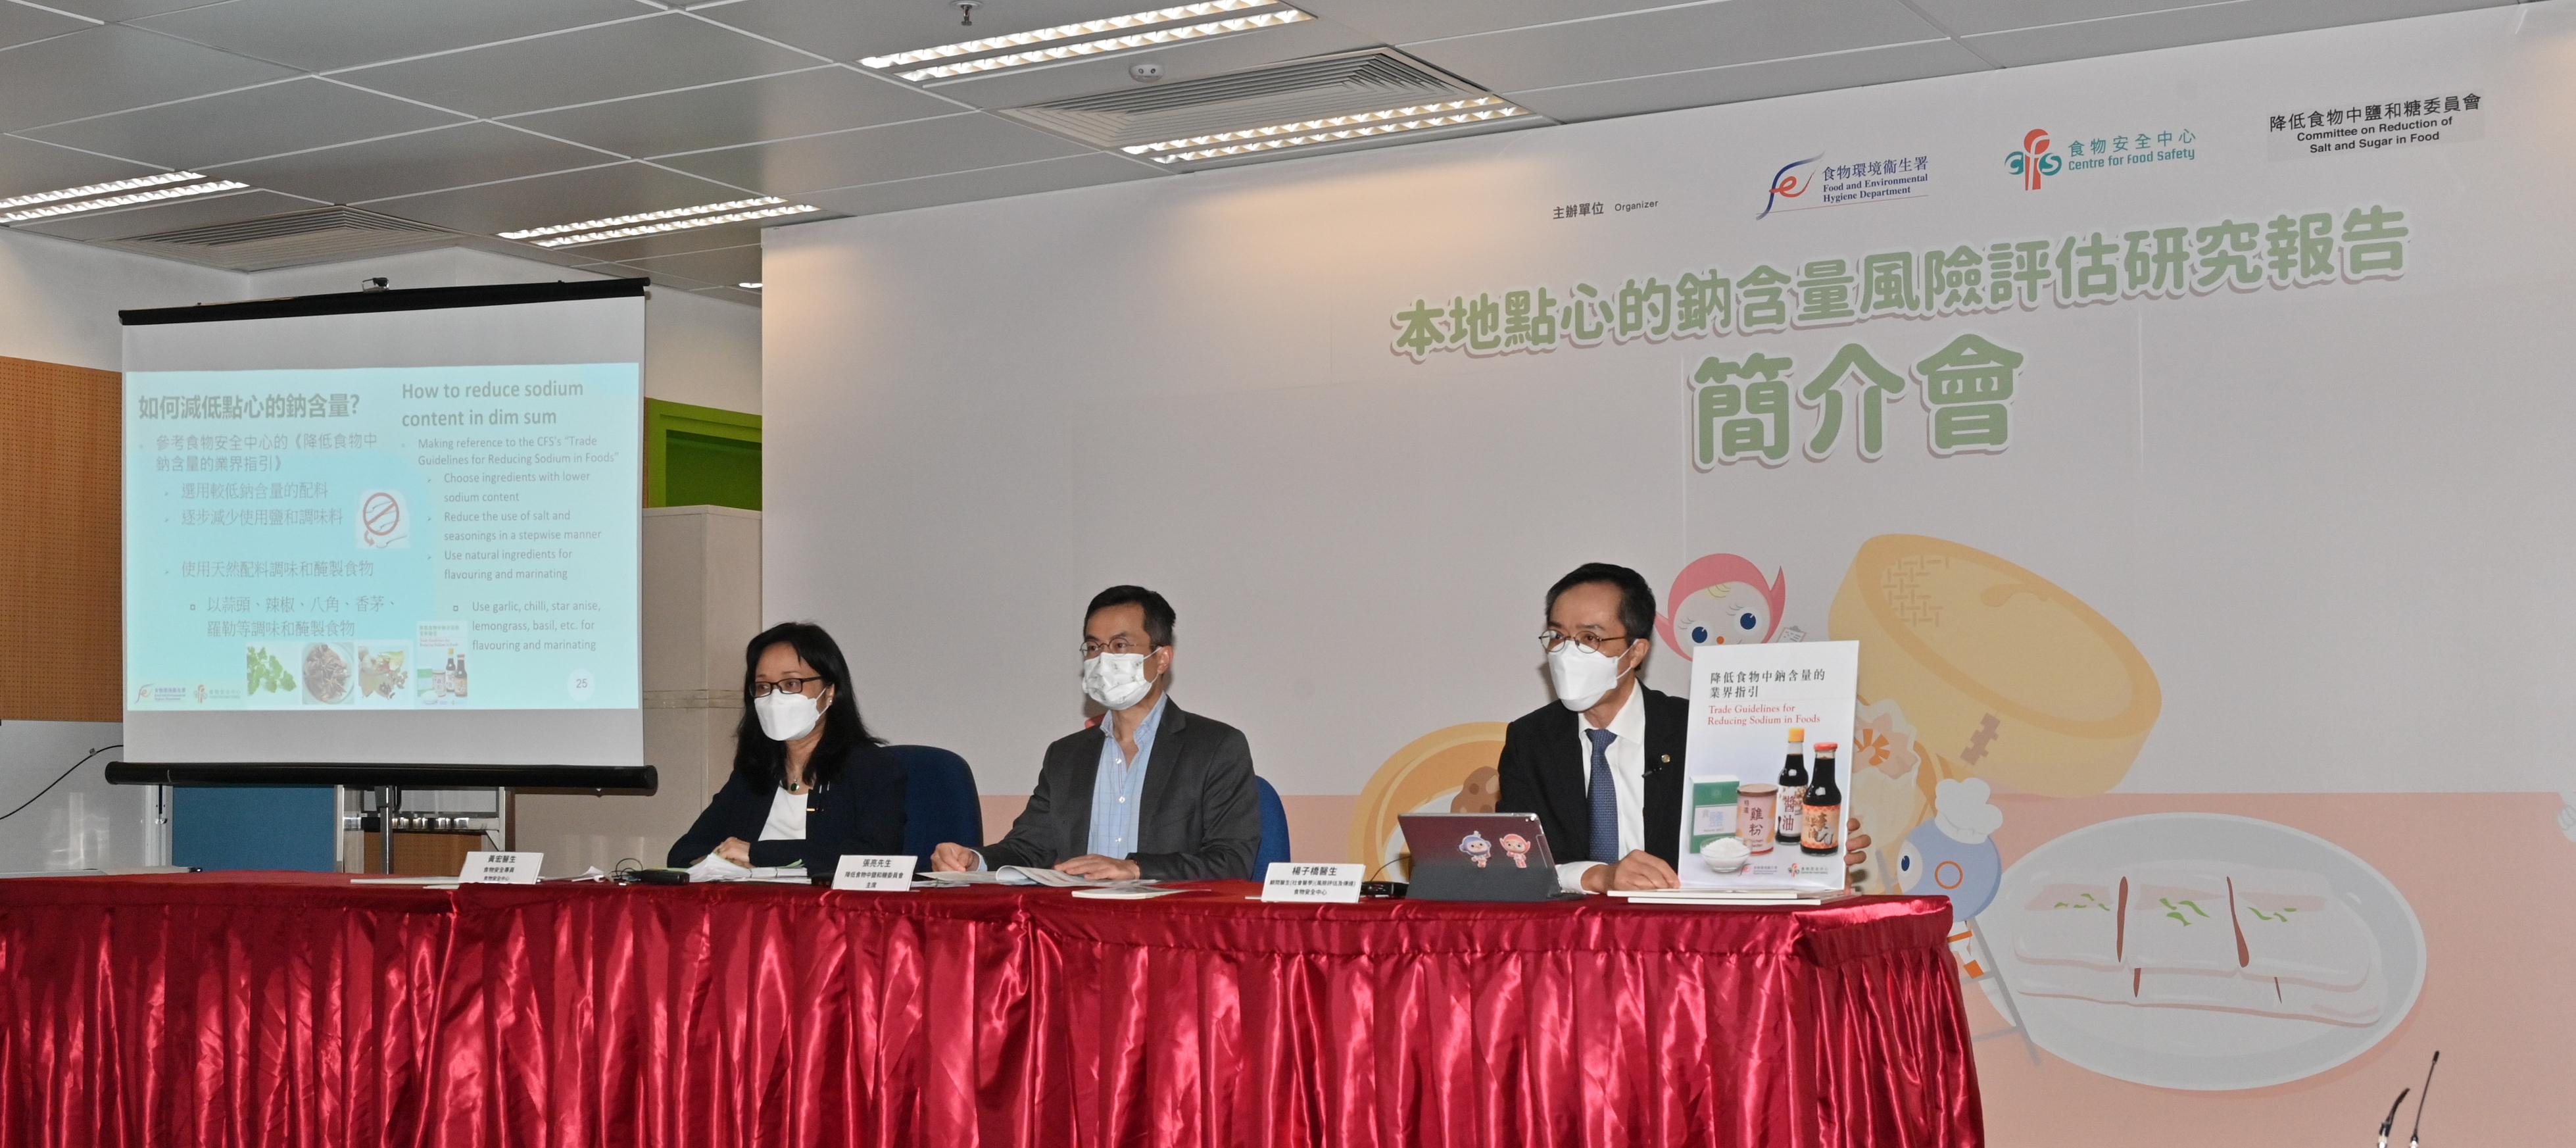 The Centre for Food Safety (CFS) of the Food and Environmental Hygiene Department (FEHD) today (July 12) released the study results on the sodium content in dim sum. Photo shows the Chairperson of the Committee on Reduction of Salt and Sugar in Food, Mr Cheung Leong (centre); the Controller of the CFS of the FEHD, Dr Christine Wong (left); and the Consultant (Community Medicine) (Risk Assessment and Communication) of the CFS, Dr Samuel Yeung (right), explaining the study results.